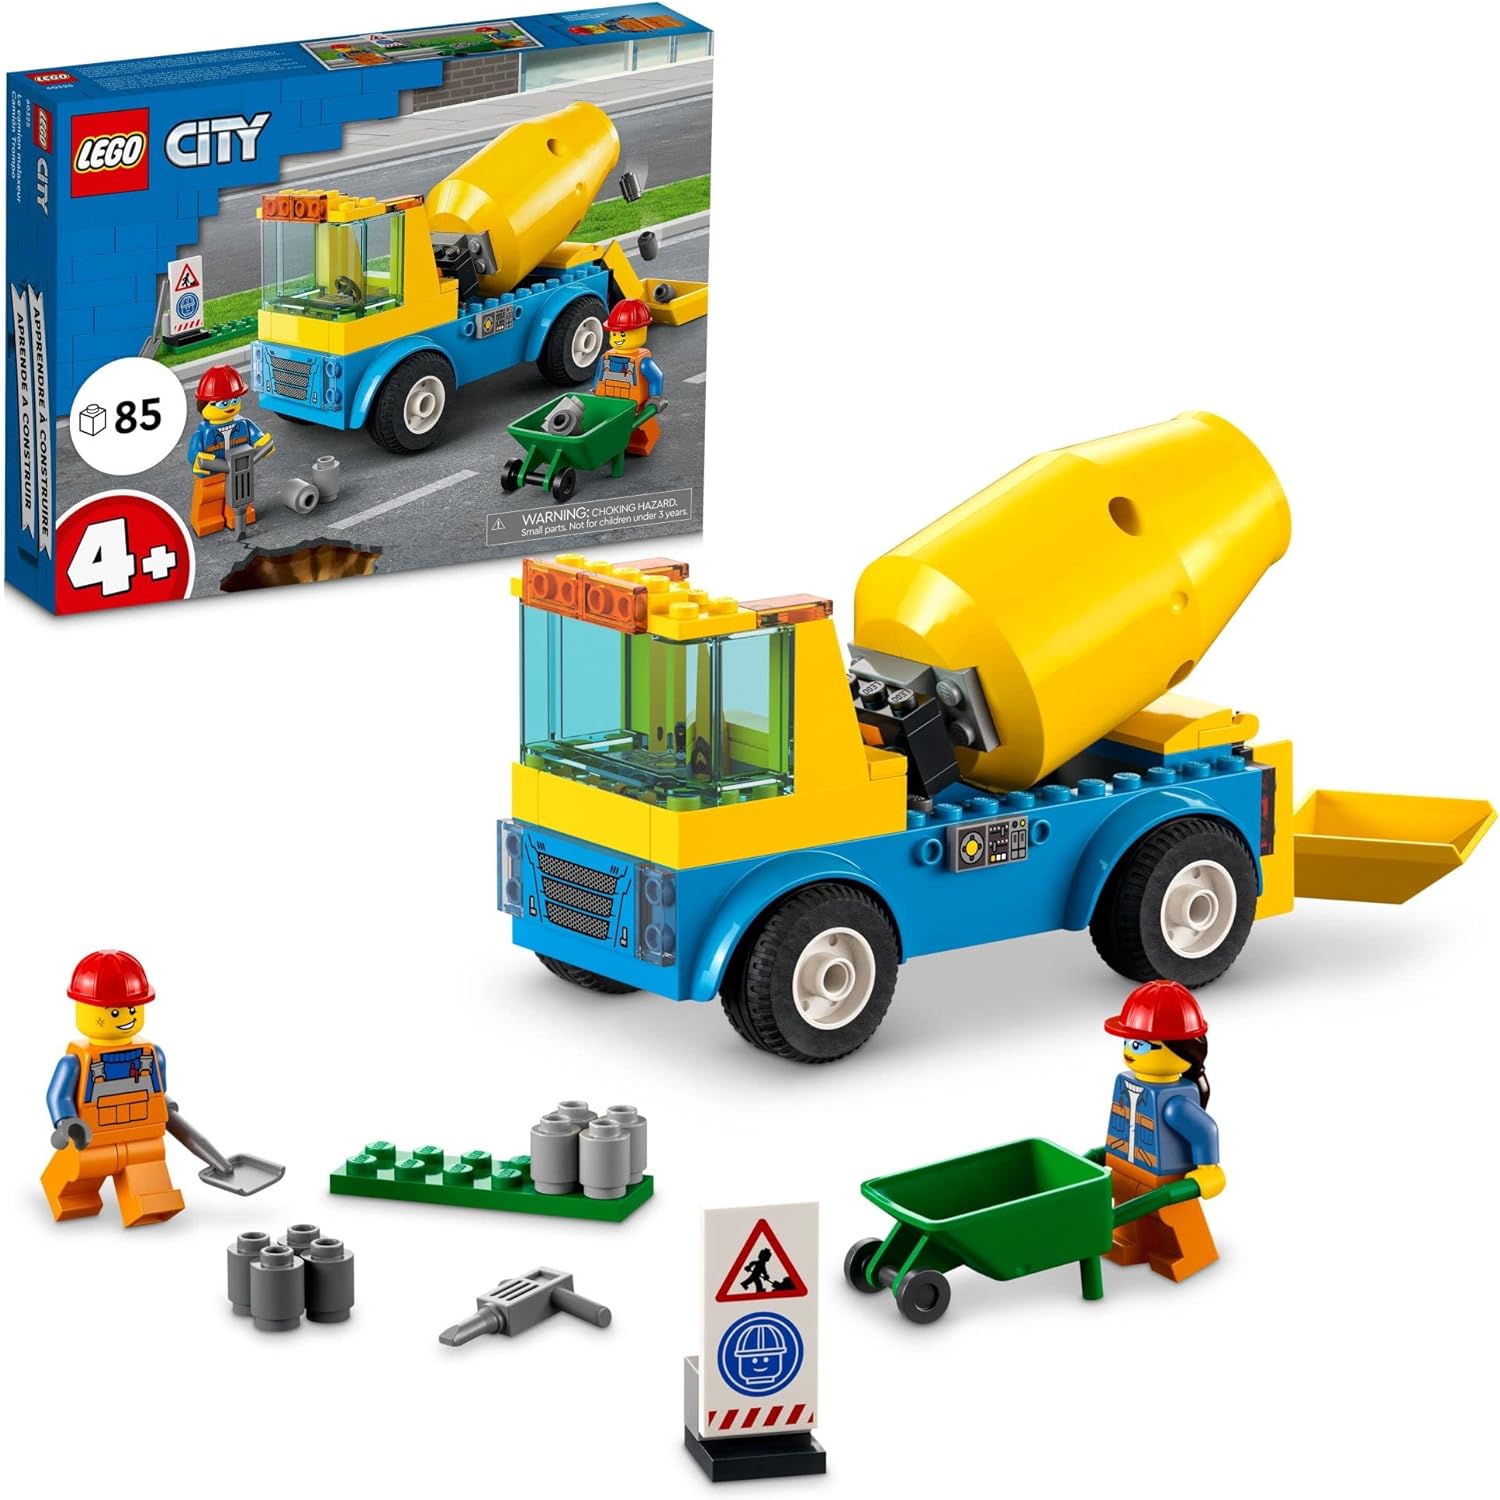 LEGO City Great Vehicles Cement Mixer Truck Building Set (85 Pieces) $12.80 + Free Shipping w/ Prime or on $35+